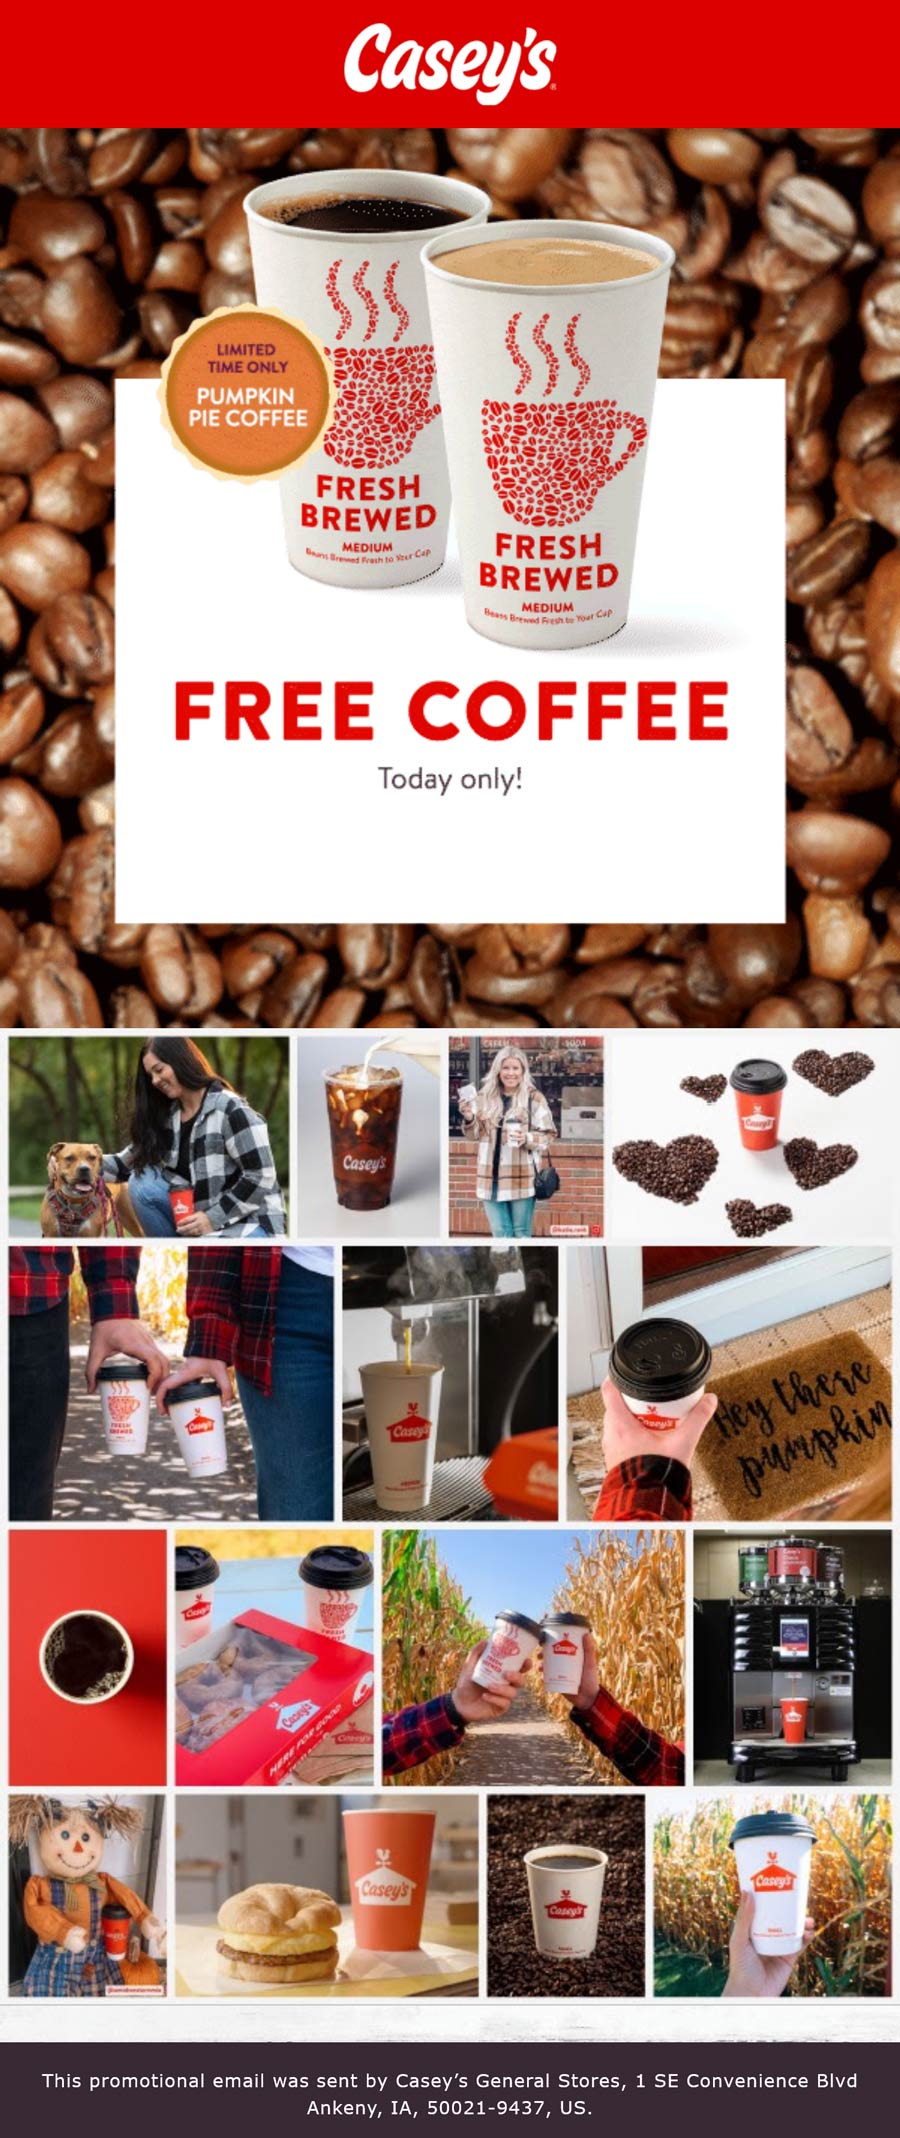 Caseys restaurants Coupon  Free coffee today at Caseys General Stores gas stations #caseys 